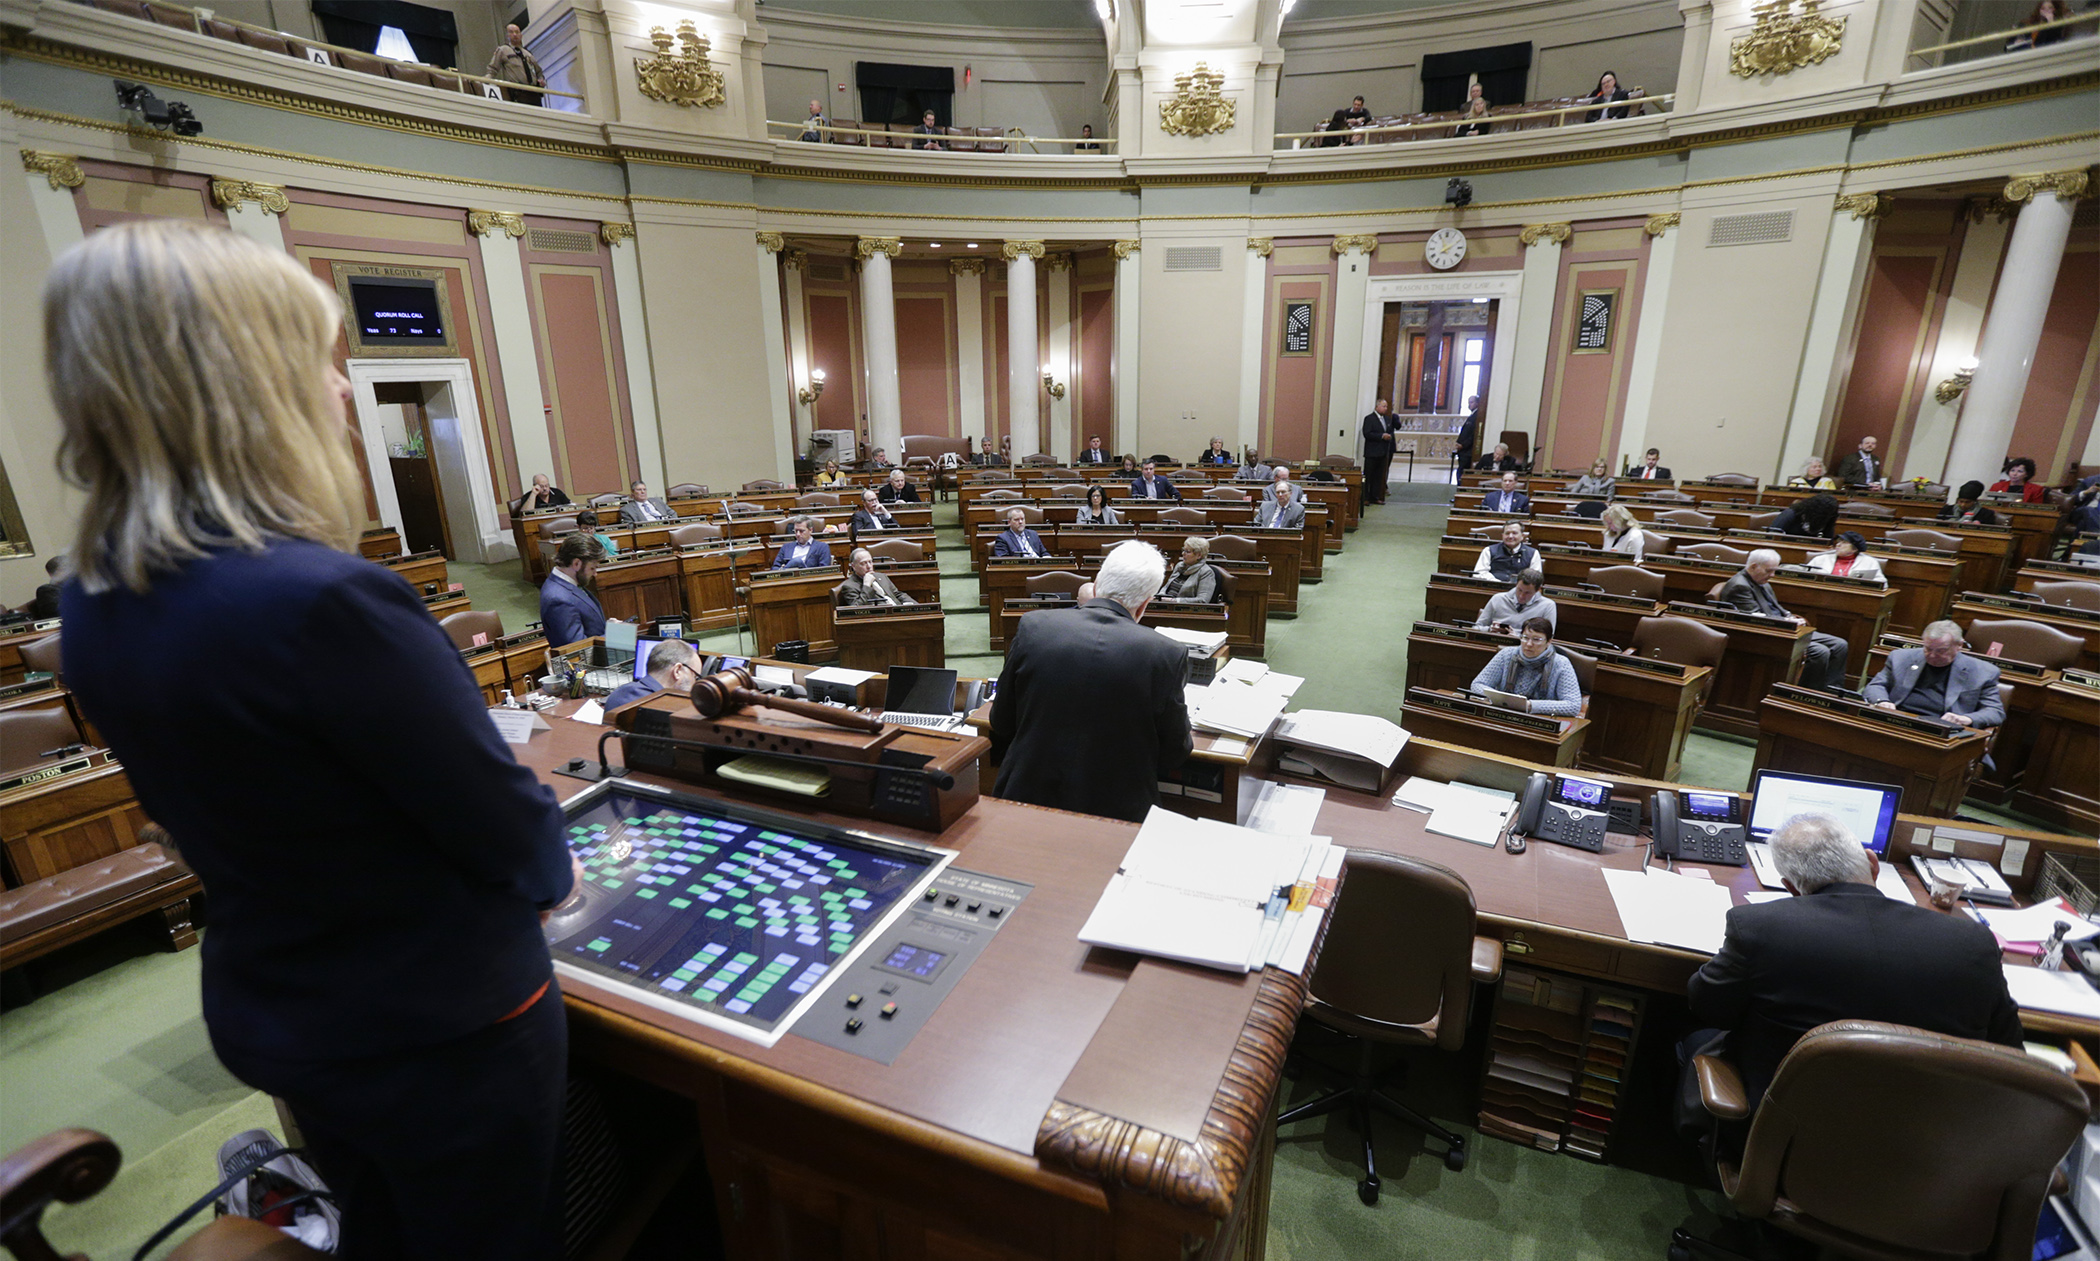 House Speaker Melissa Hortman stands at her desk as Chief Clerk Patrick Murphy does a quorum call by voice at the start of session March 16. Photo by Paul Battaglia